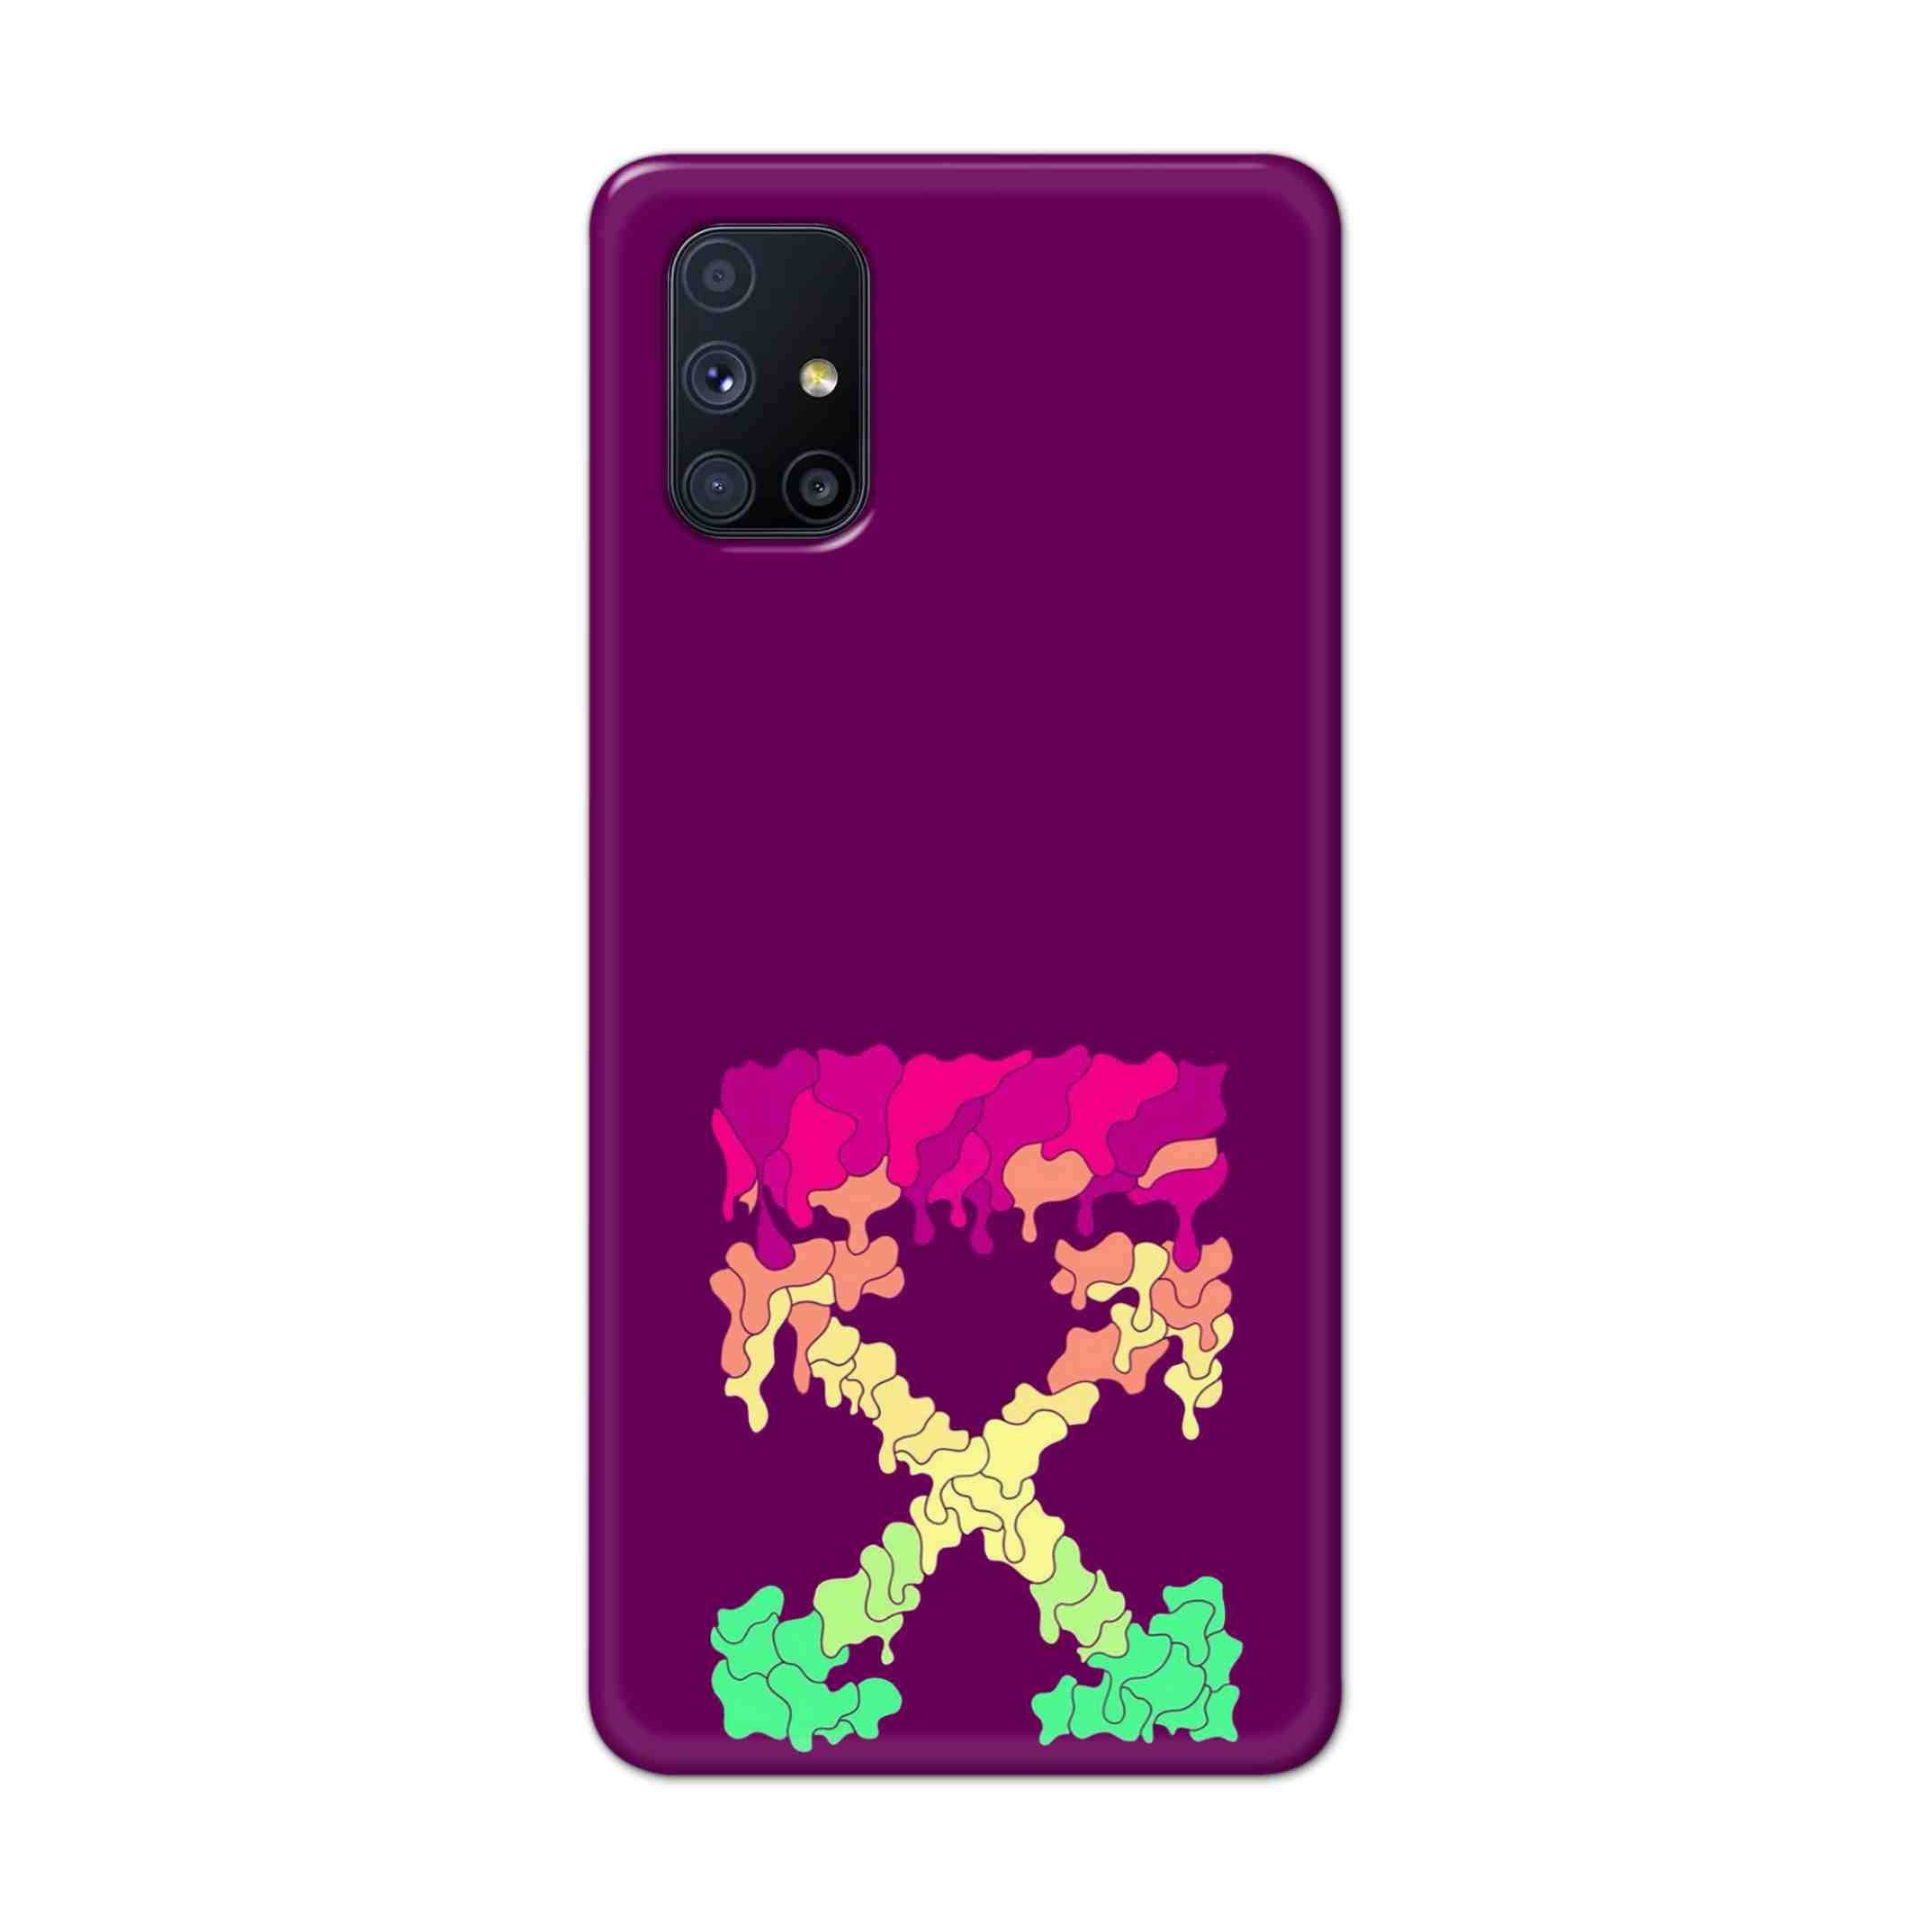 Buy X.O Hard Back Mobile Phone Case Cover For Samsung Galaxy M51 Online